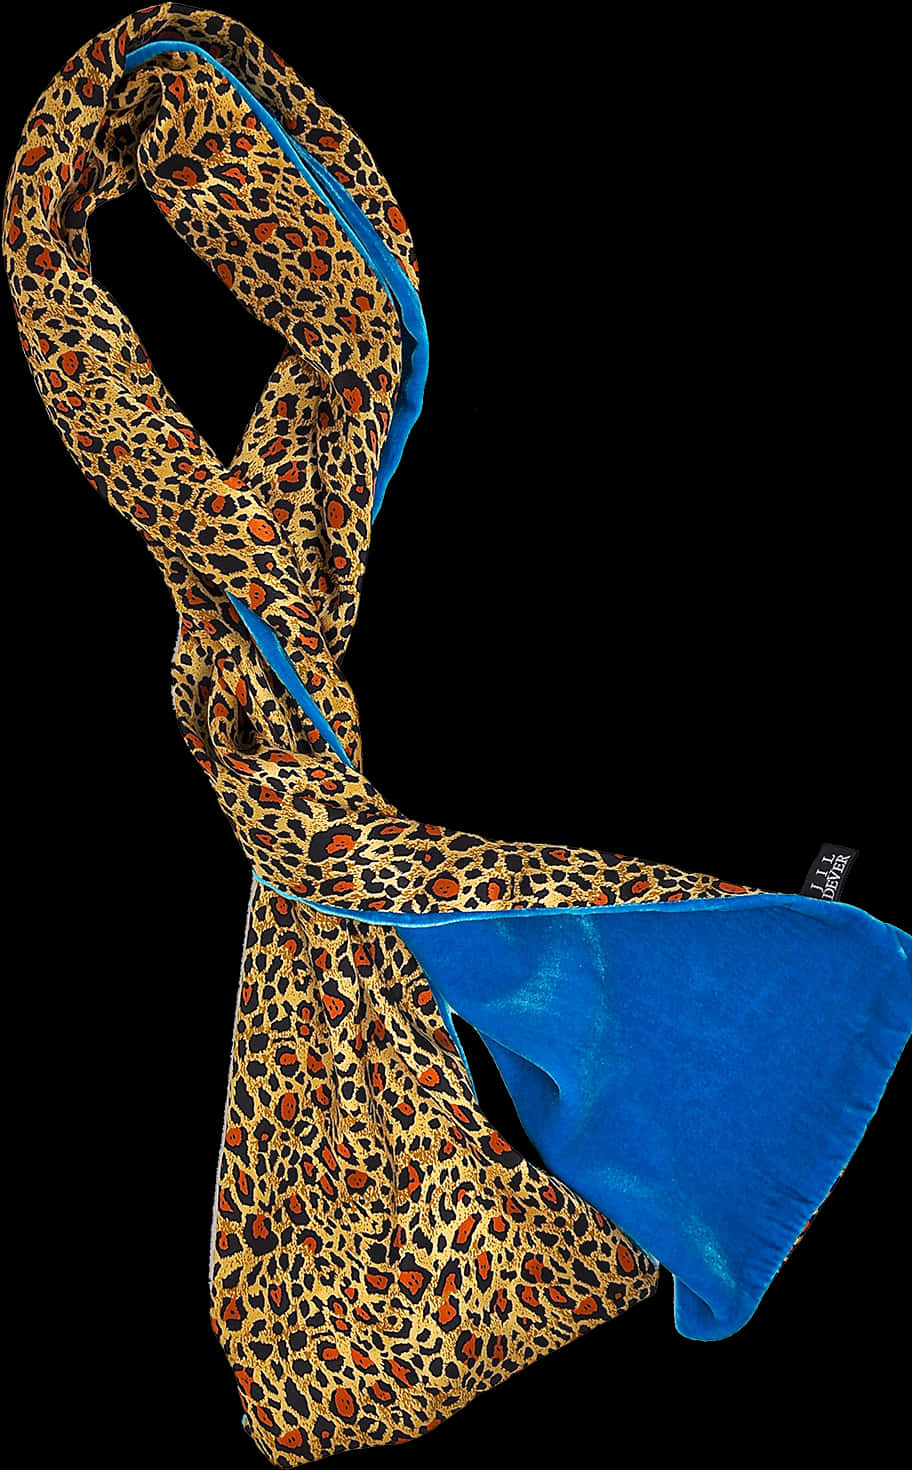 A Scarf With Leopard Print And Blue Trim